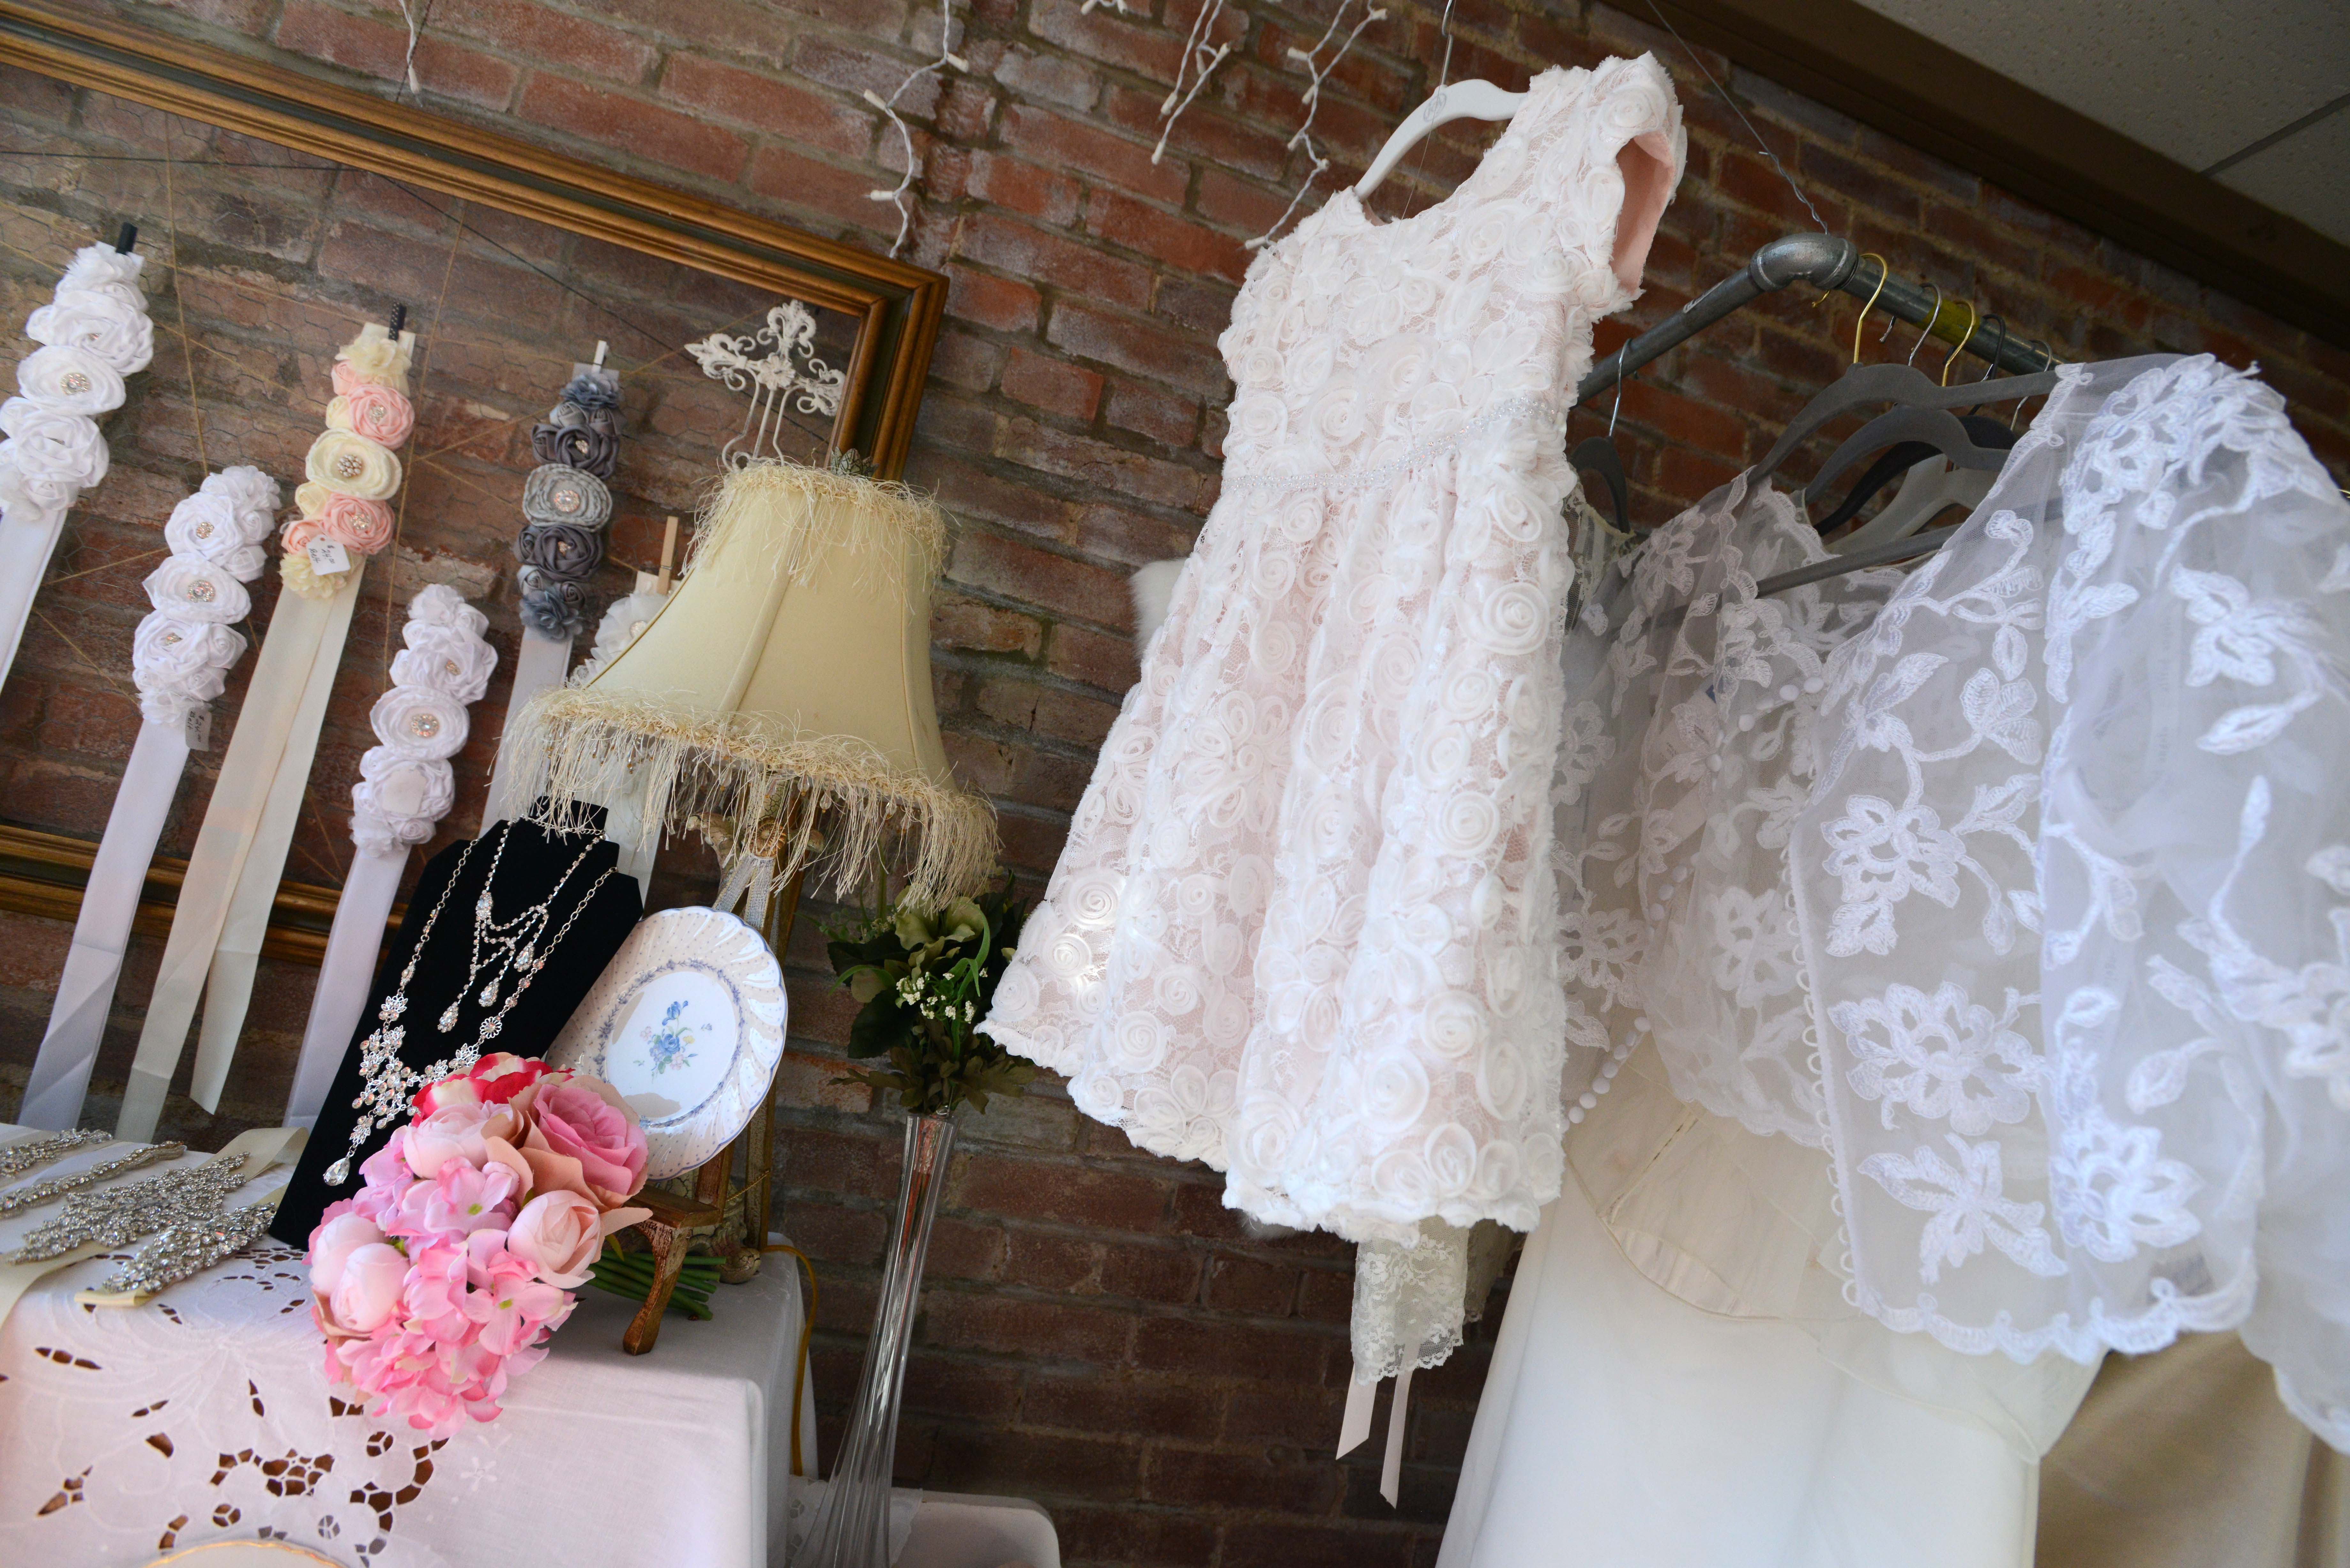 wedding consignment stores near me